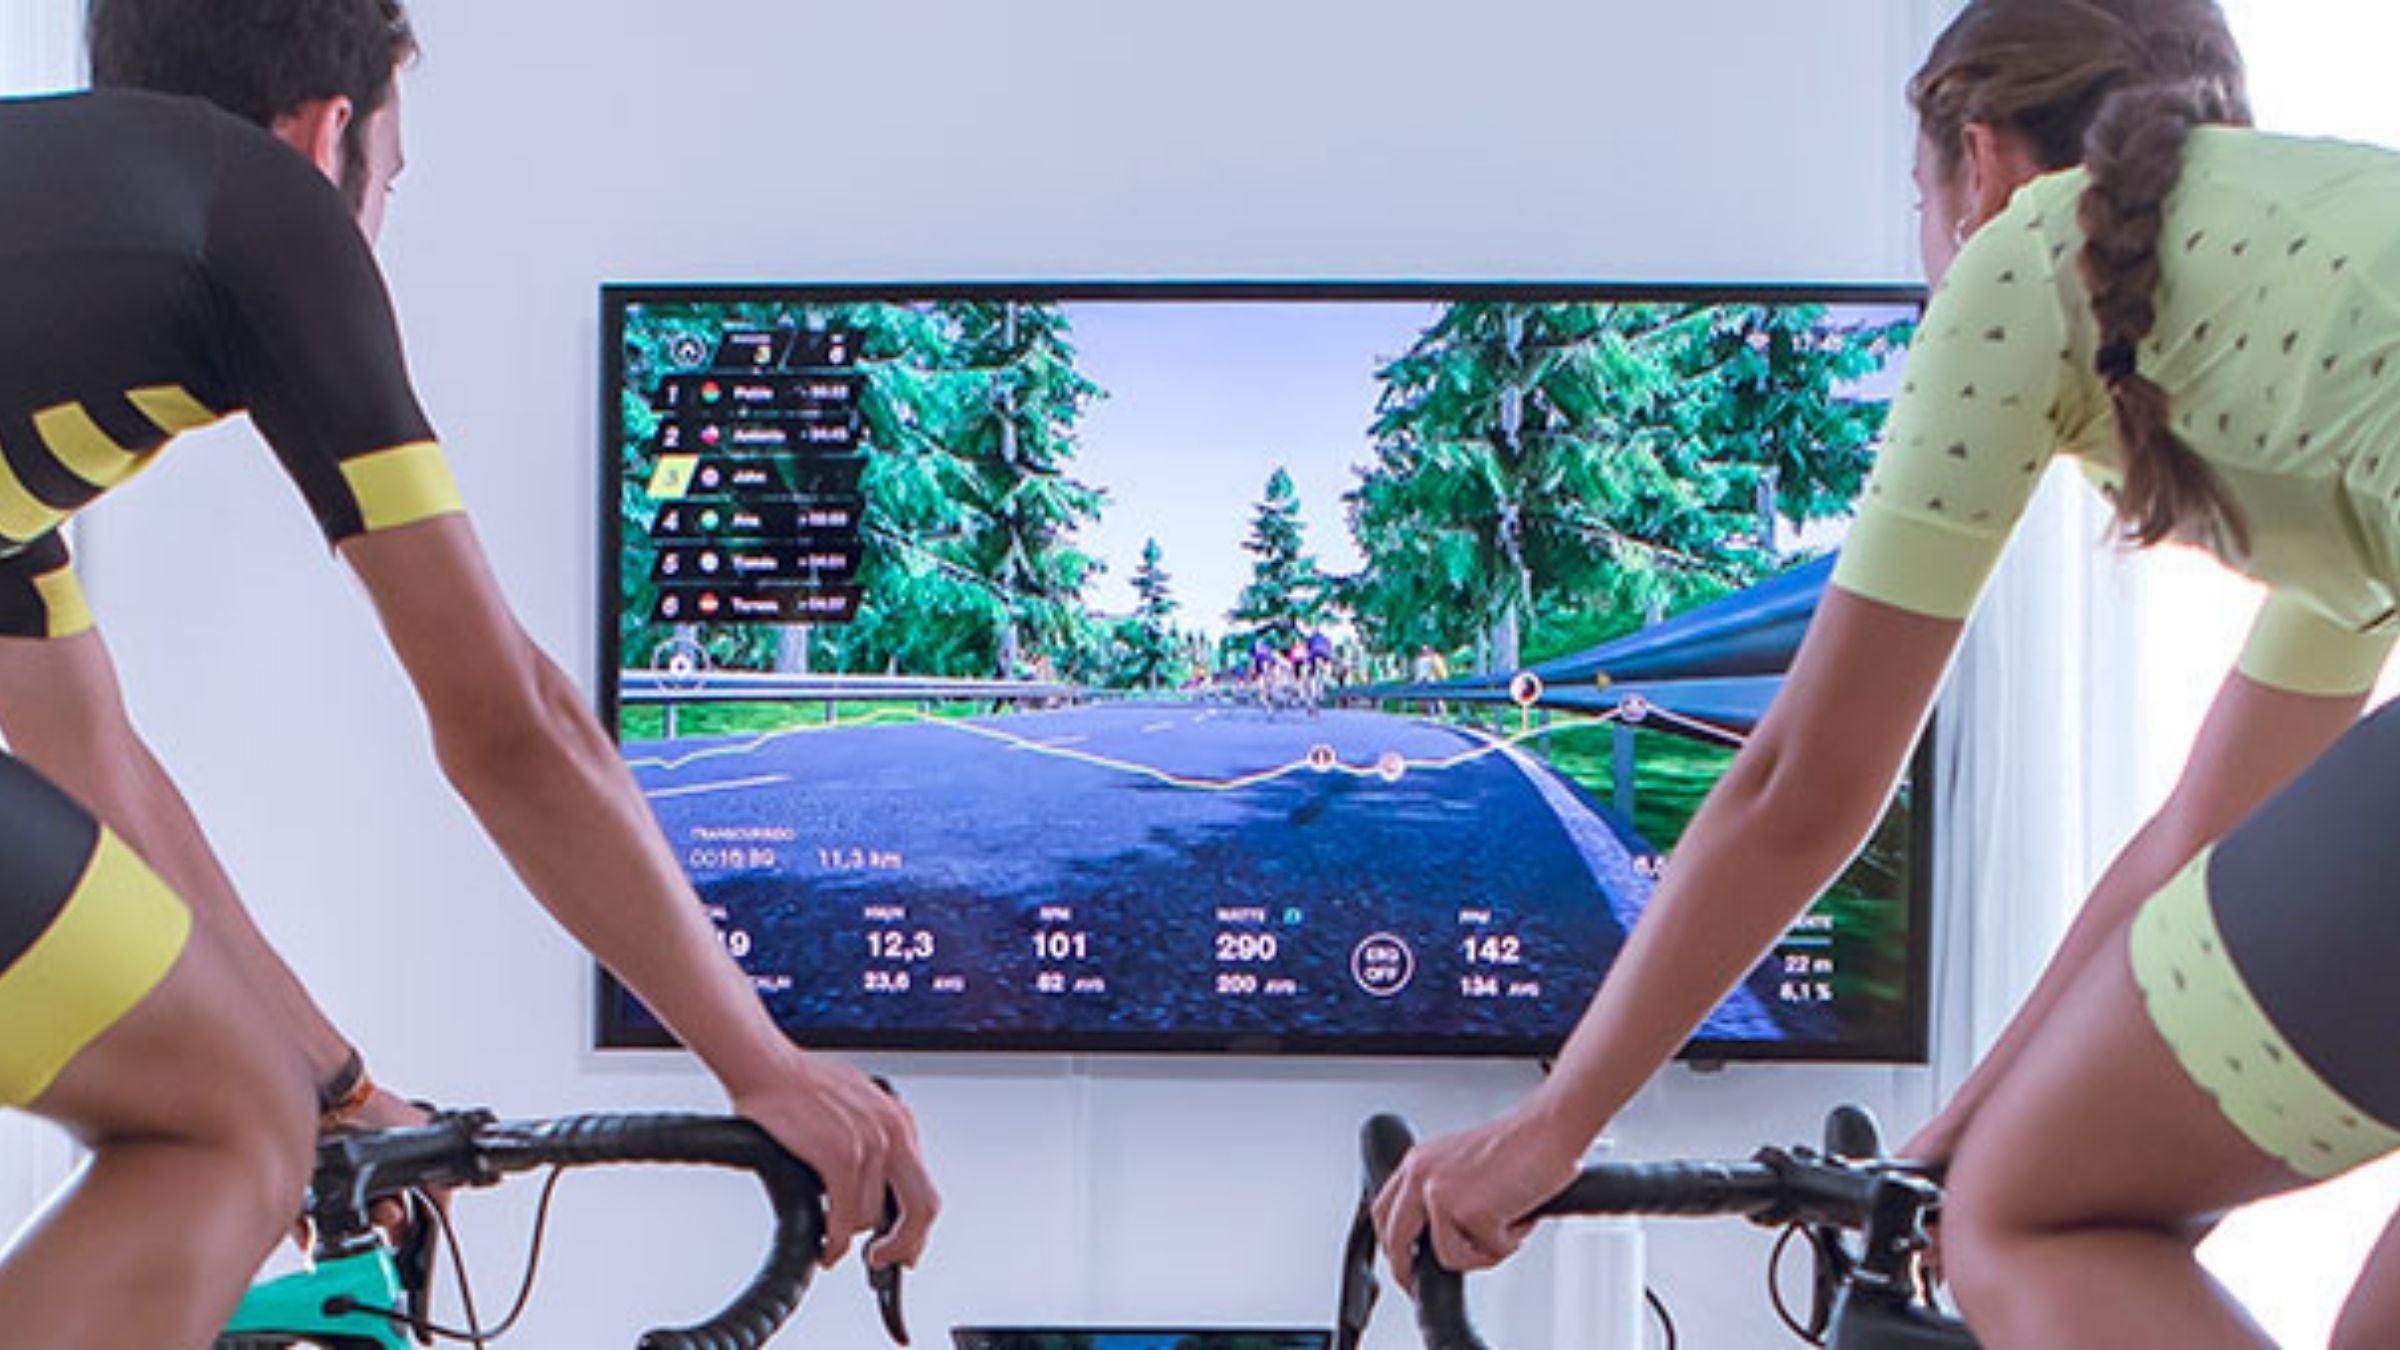 Pro Cycling Manager 2021 Trainer